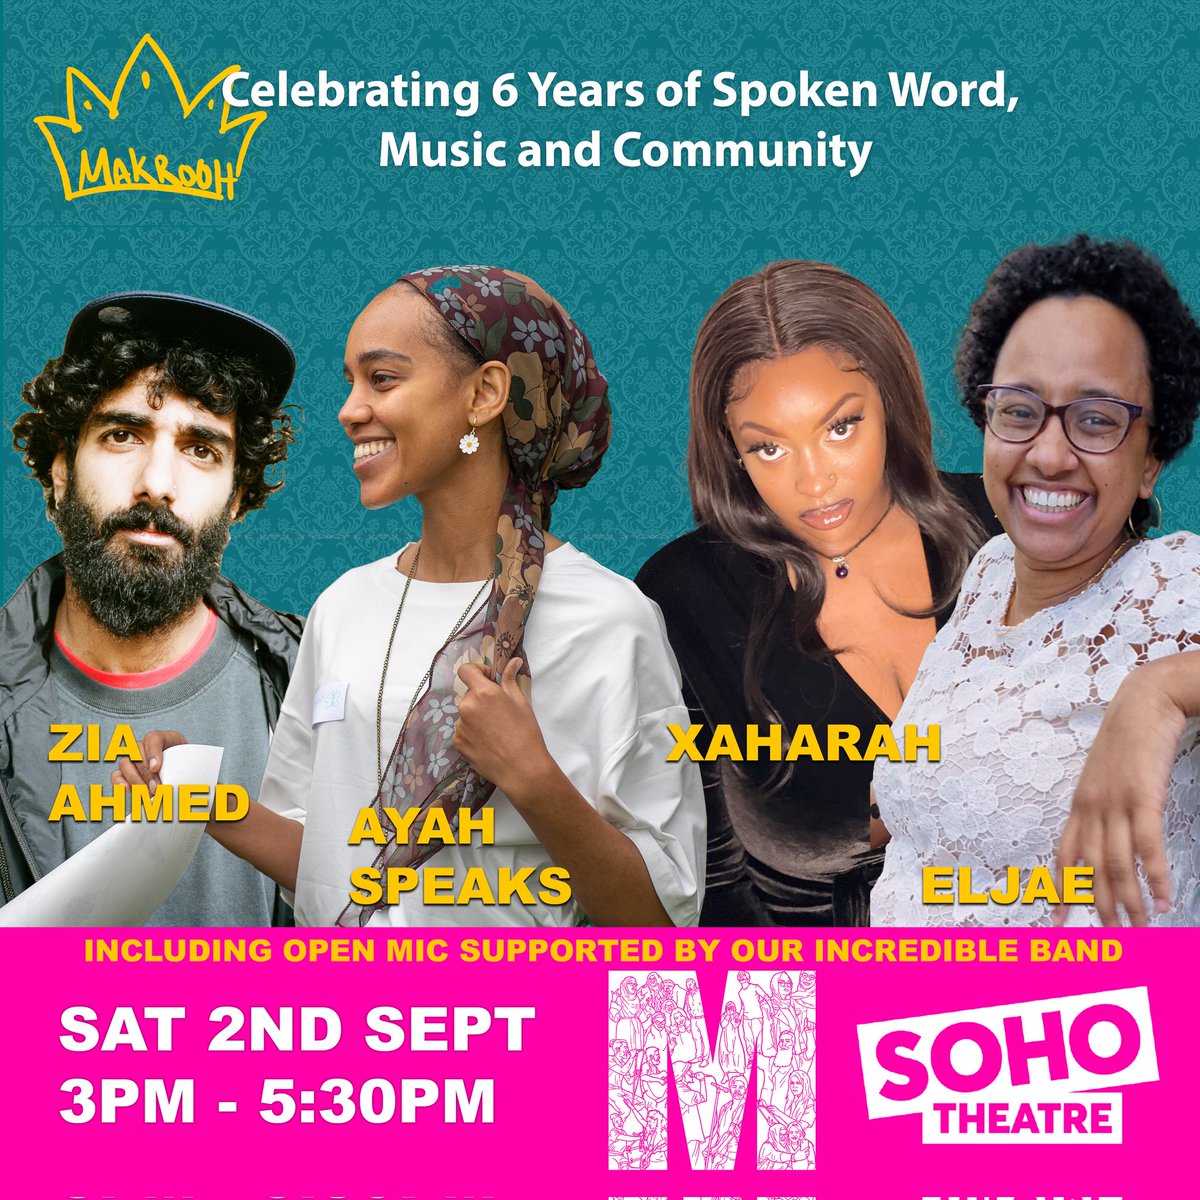 Tomorrow don't forget to join @MakroohUK at @sohotheatre as they celebrate 6 years of #spokenword #music #community in pure Makrooh style! sohotheatre.com/events/makrooh…